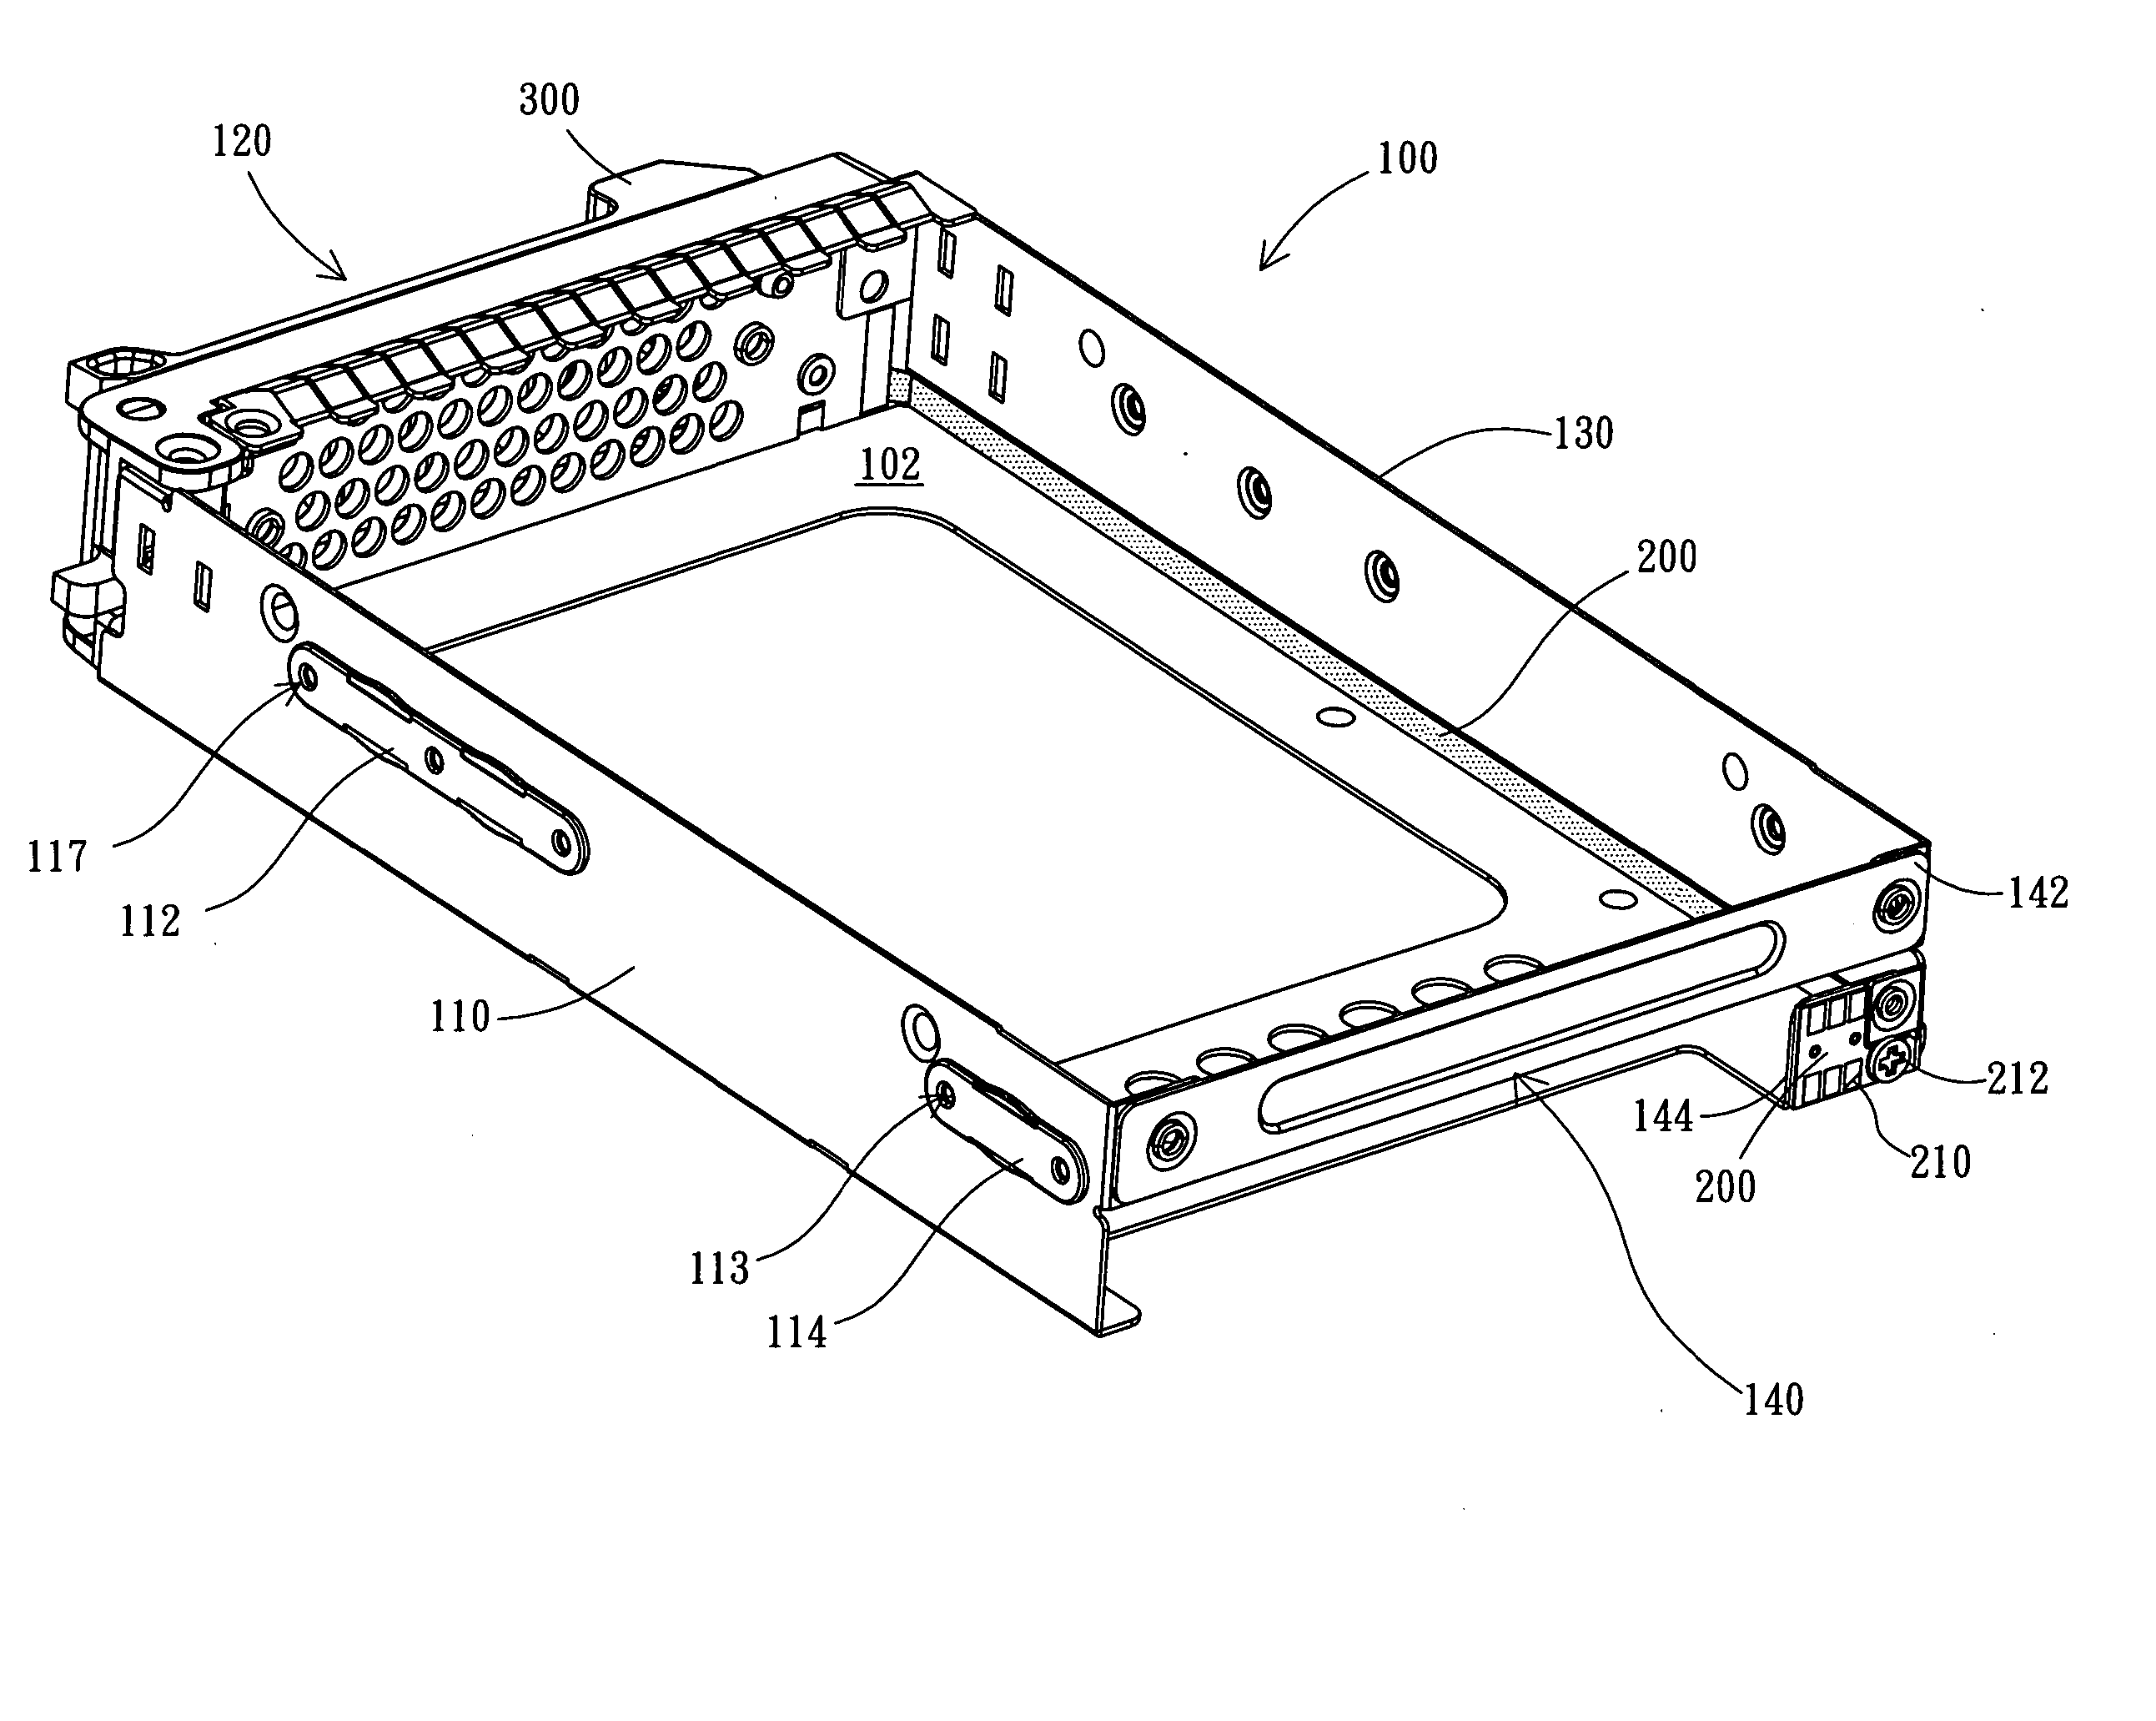 HDD tray structure